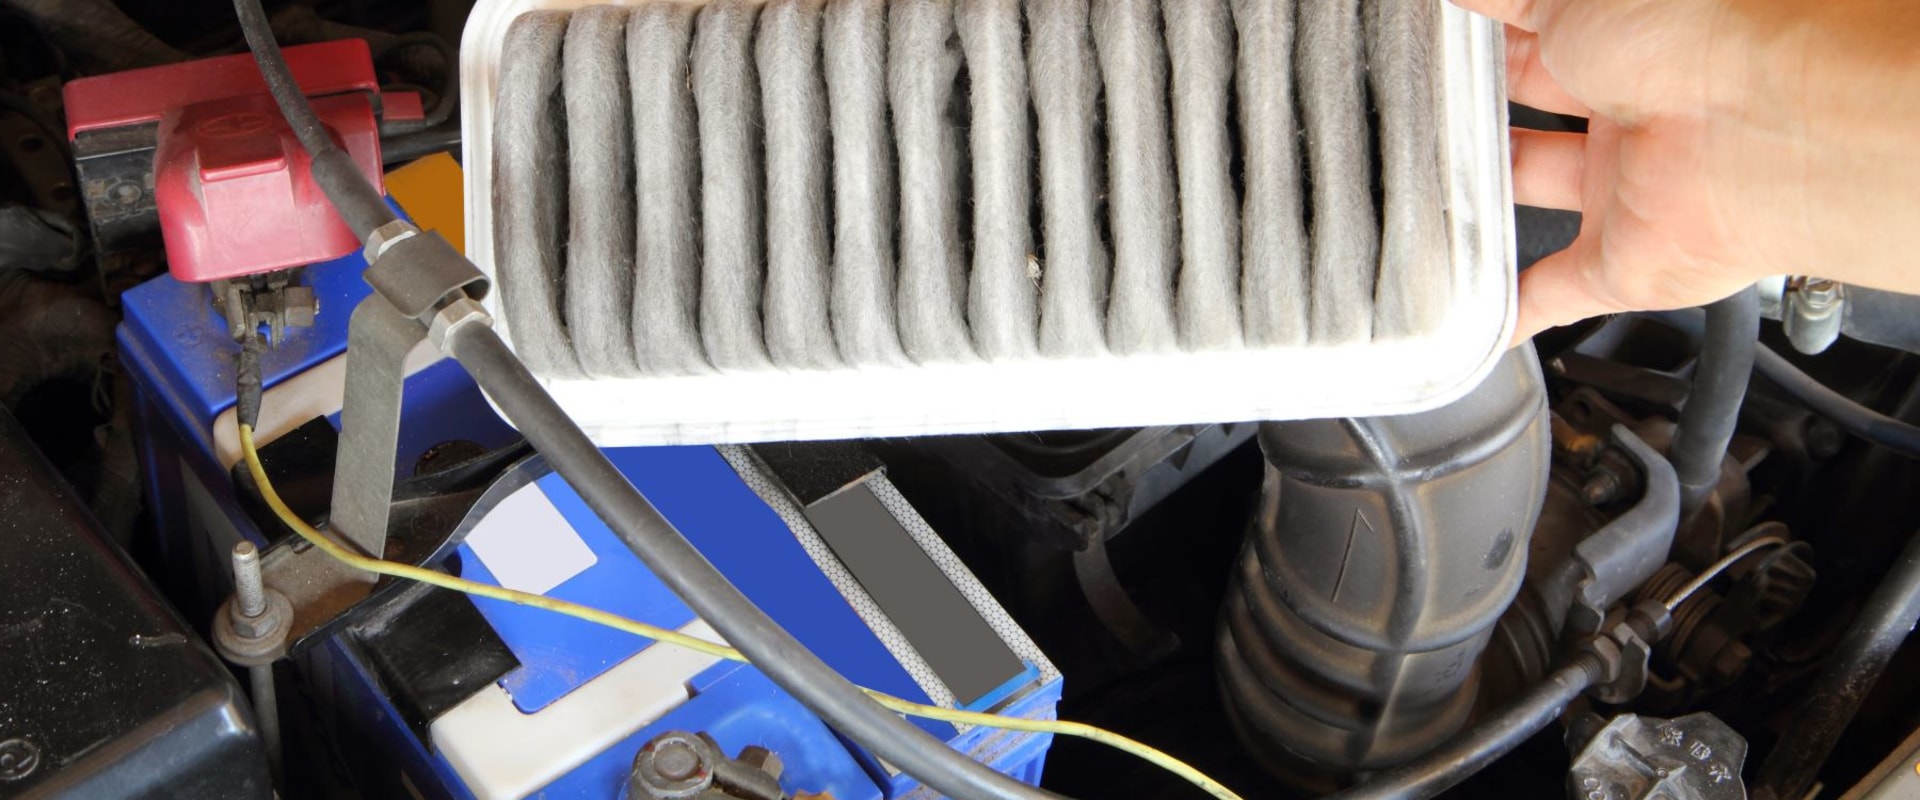 What Happens When You Drive With a Dirty Air Filter?